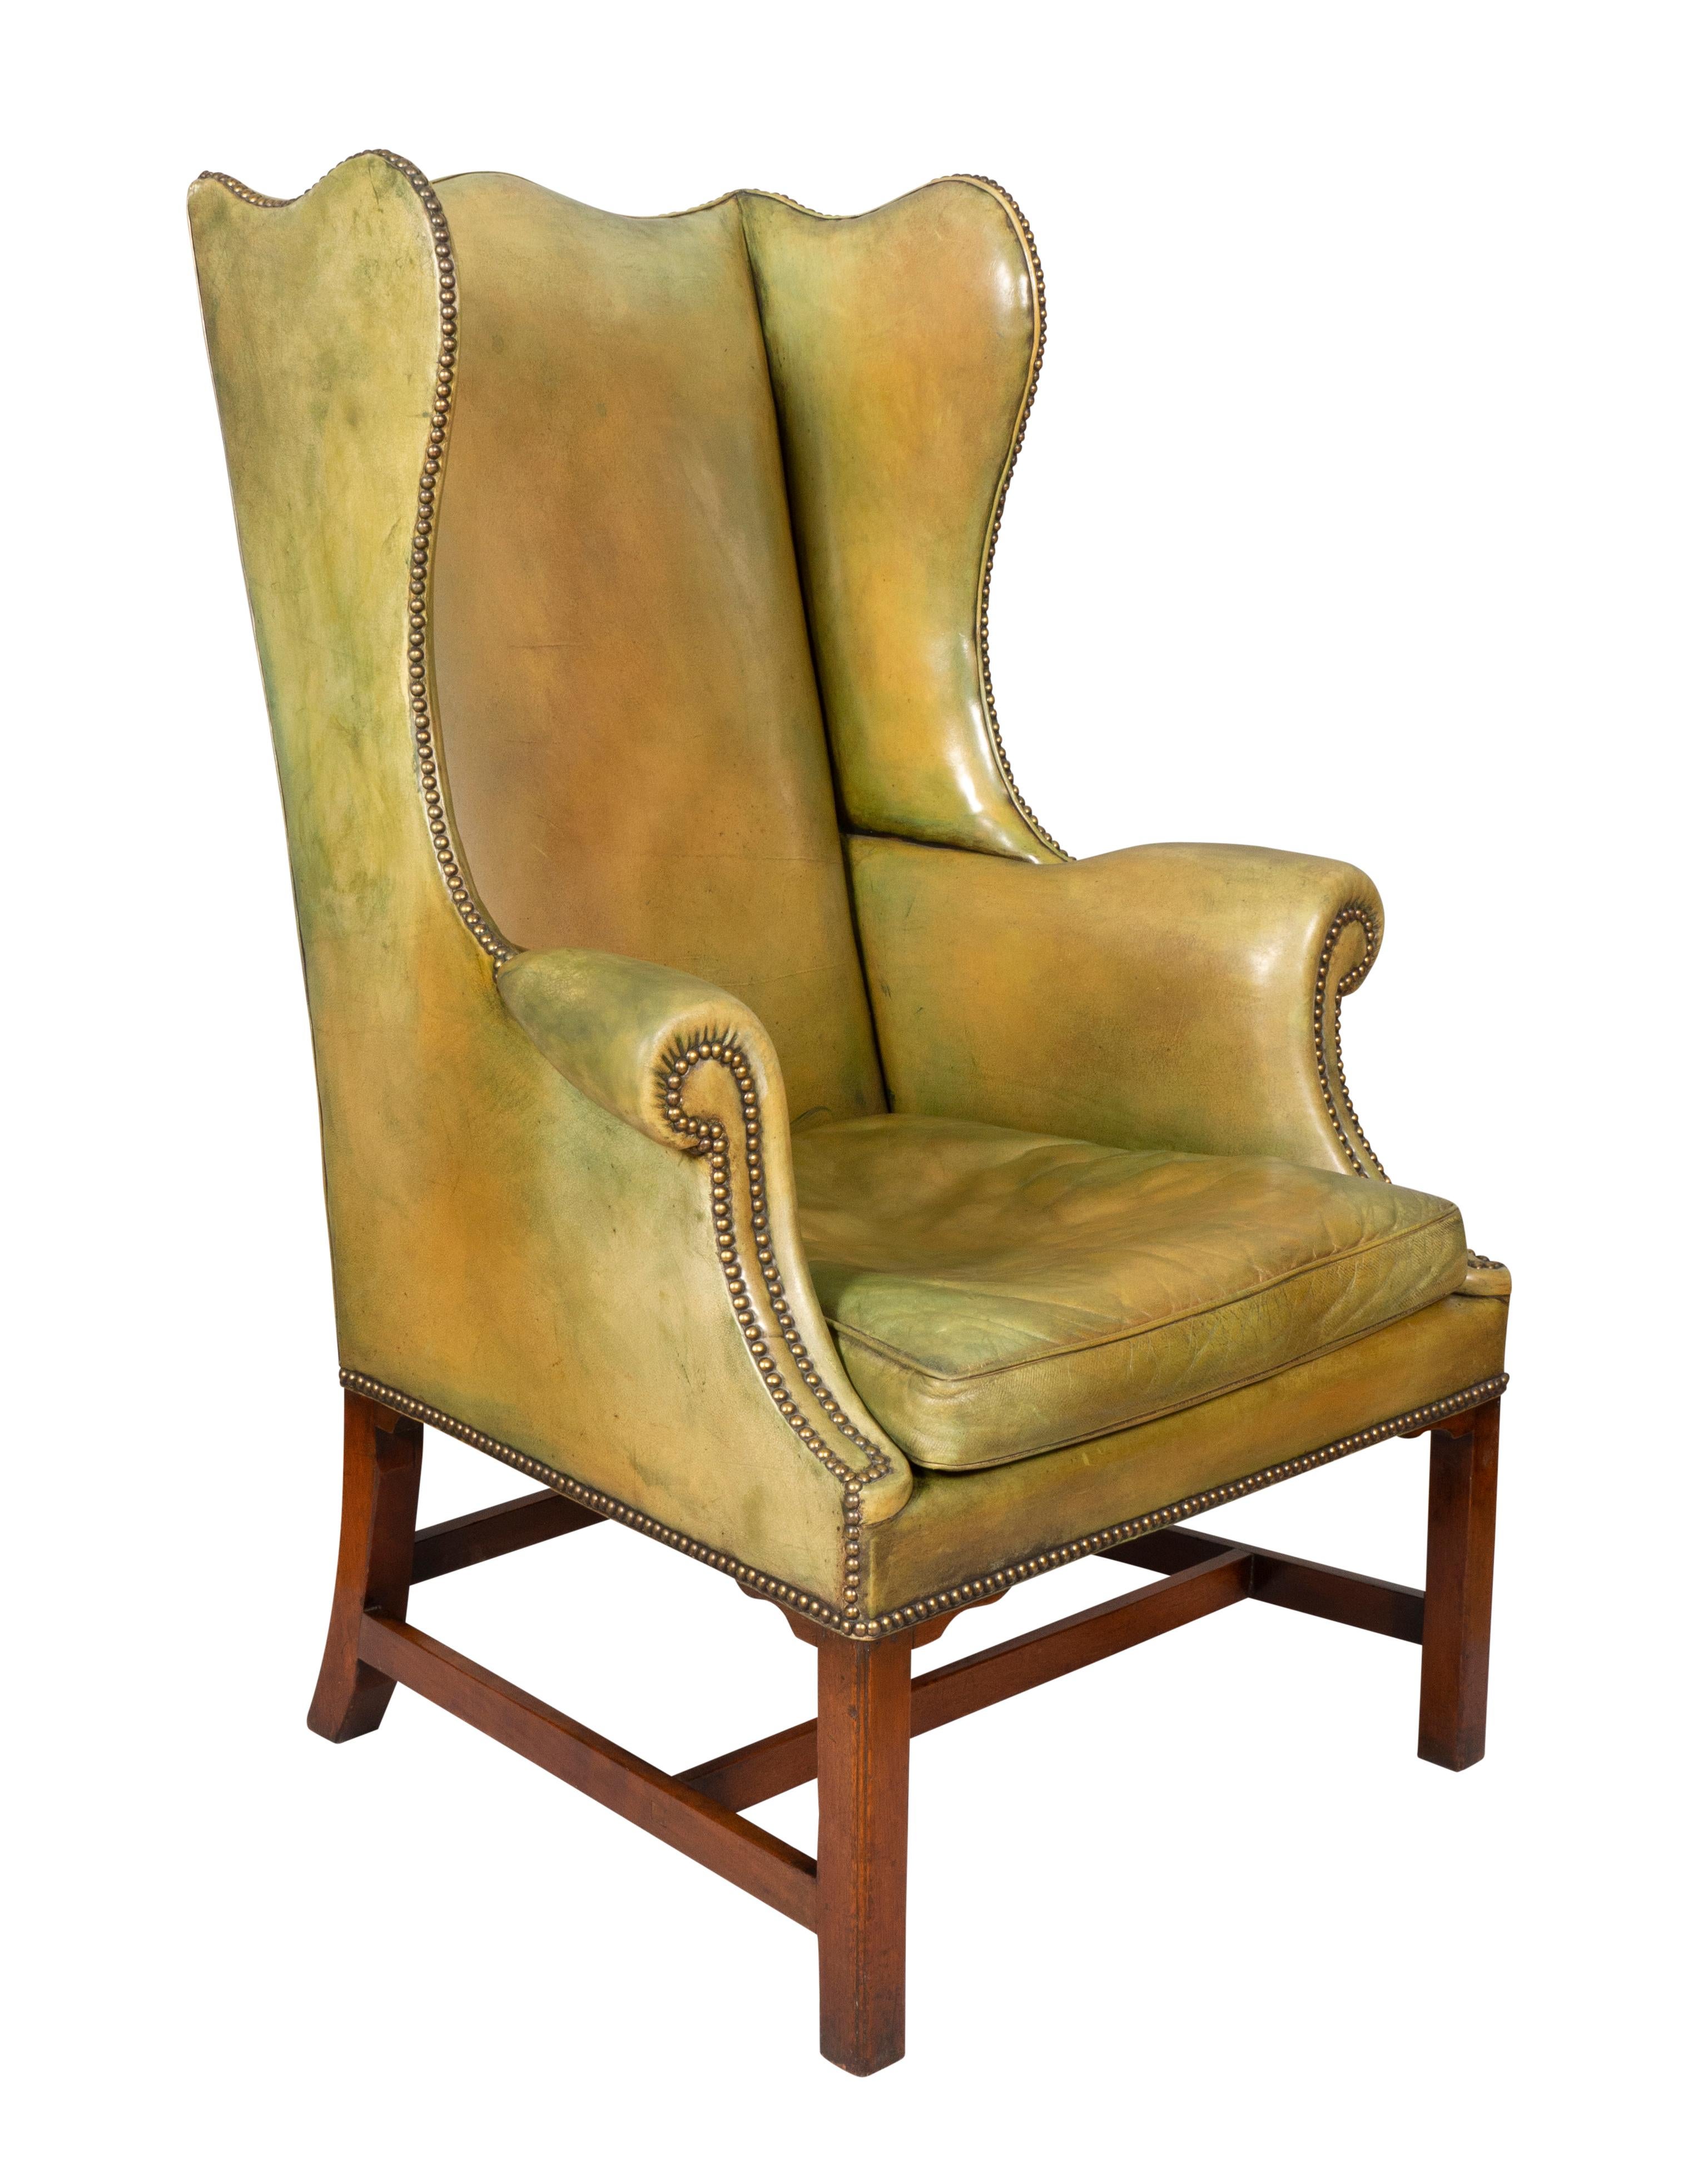 With green leather faded into some yellow tones. Typical form with wing back and scrolled arms with brass tacks and raised on square section legs and double H form stretchers.